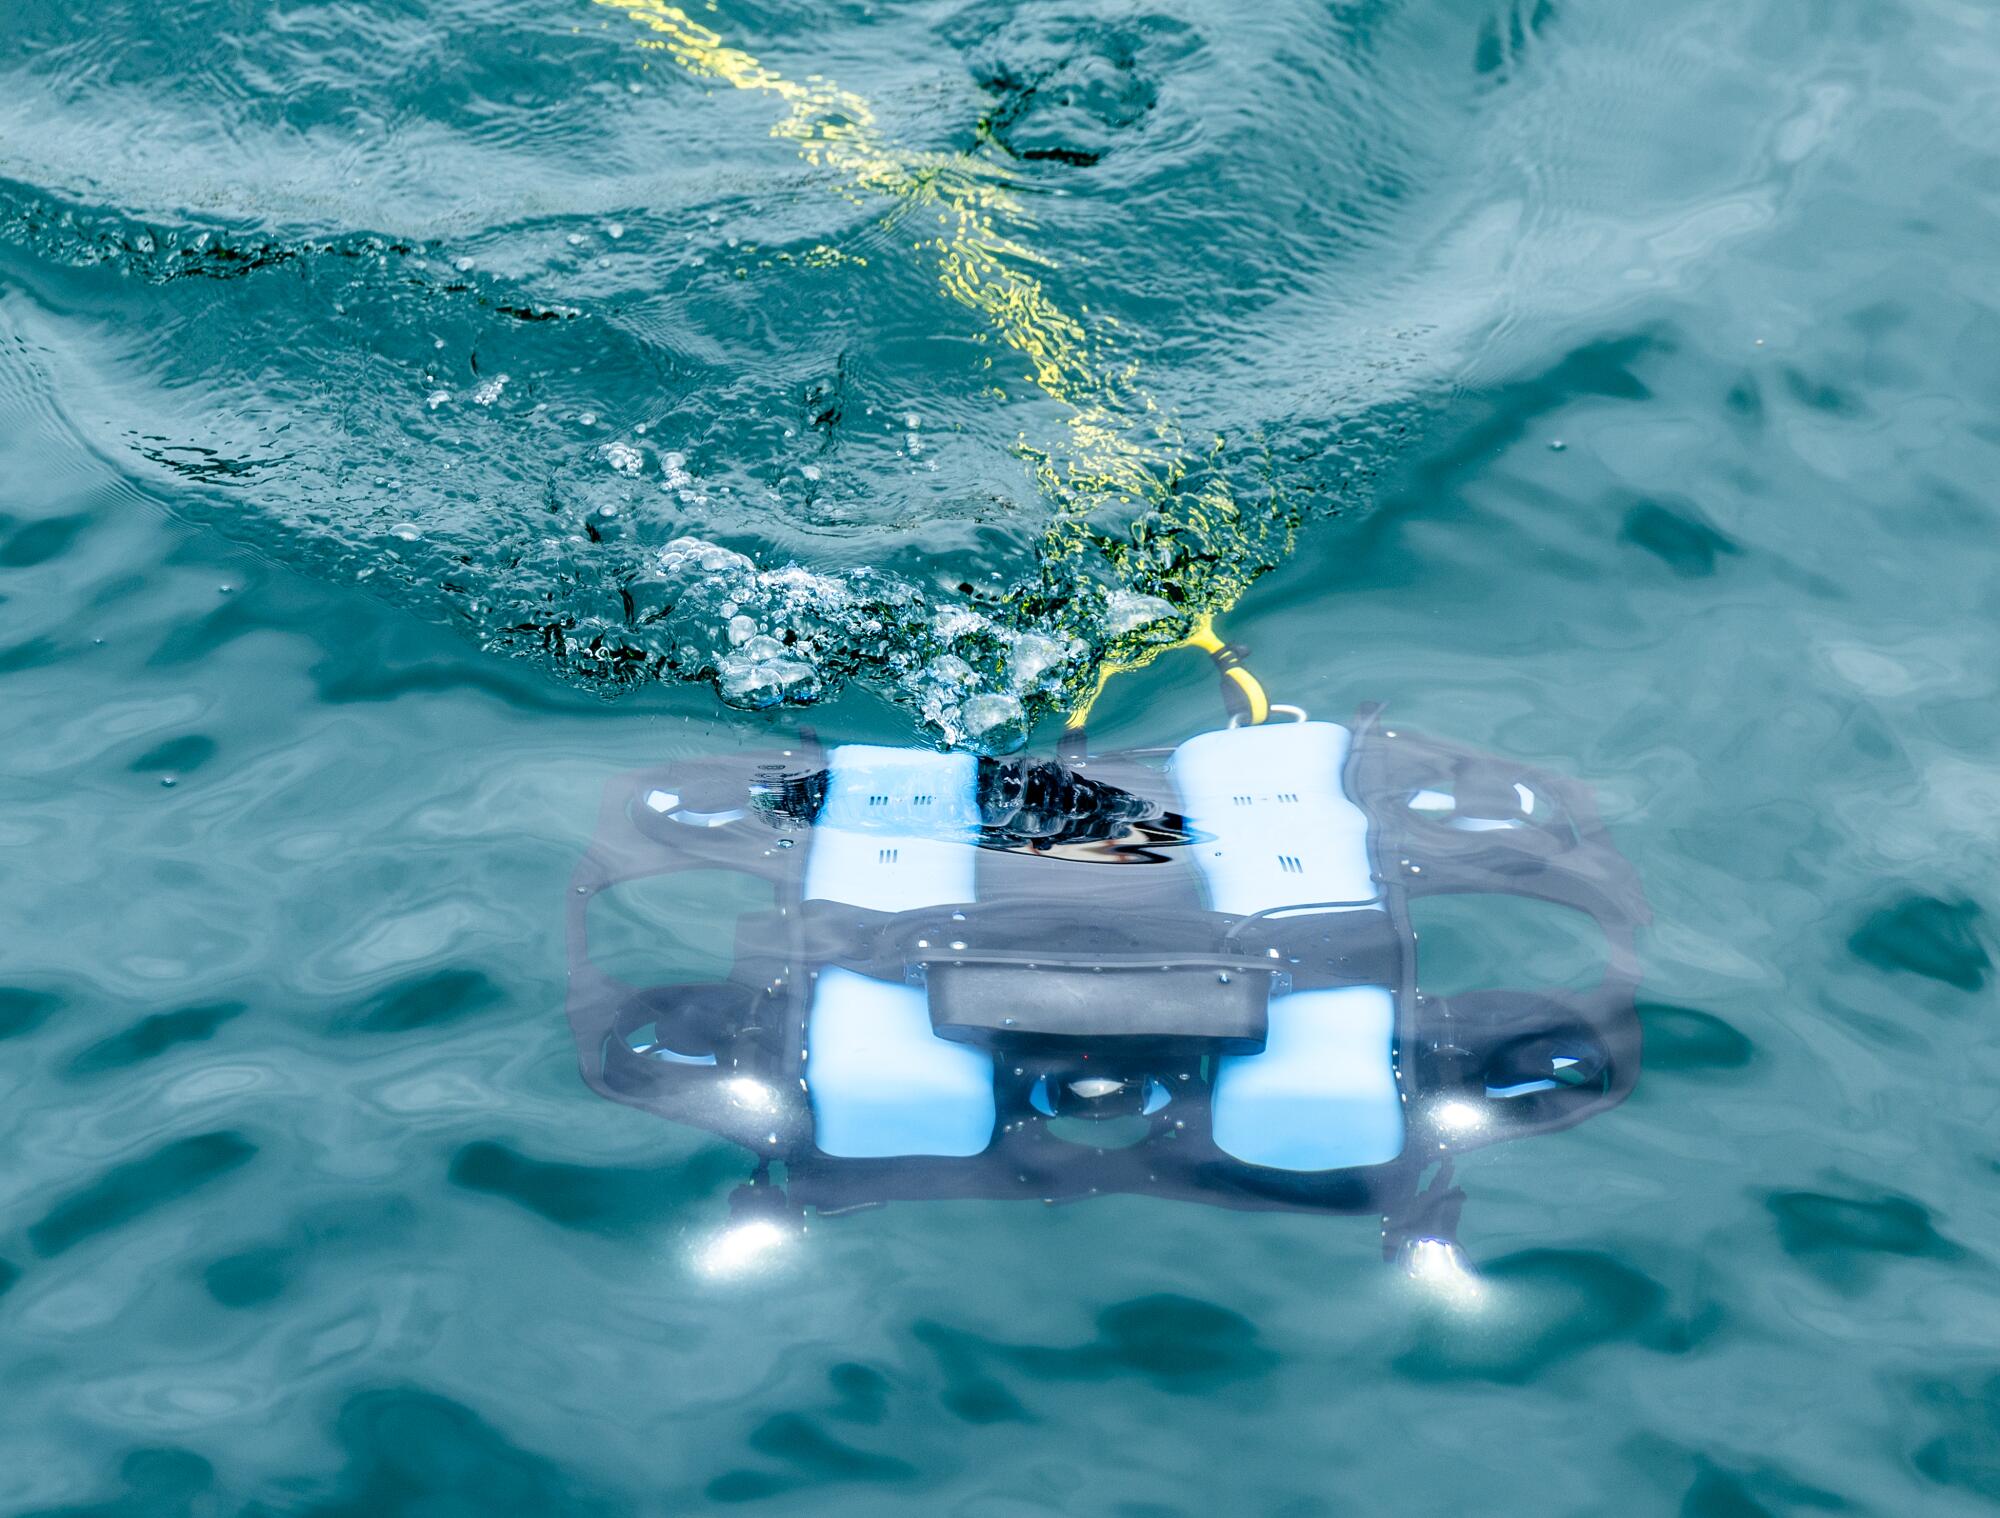 BlueROV2, a high-performance remotely operated vehicle (ROV) that can be used for inspections, research, and adventuring,